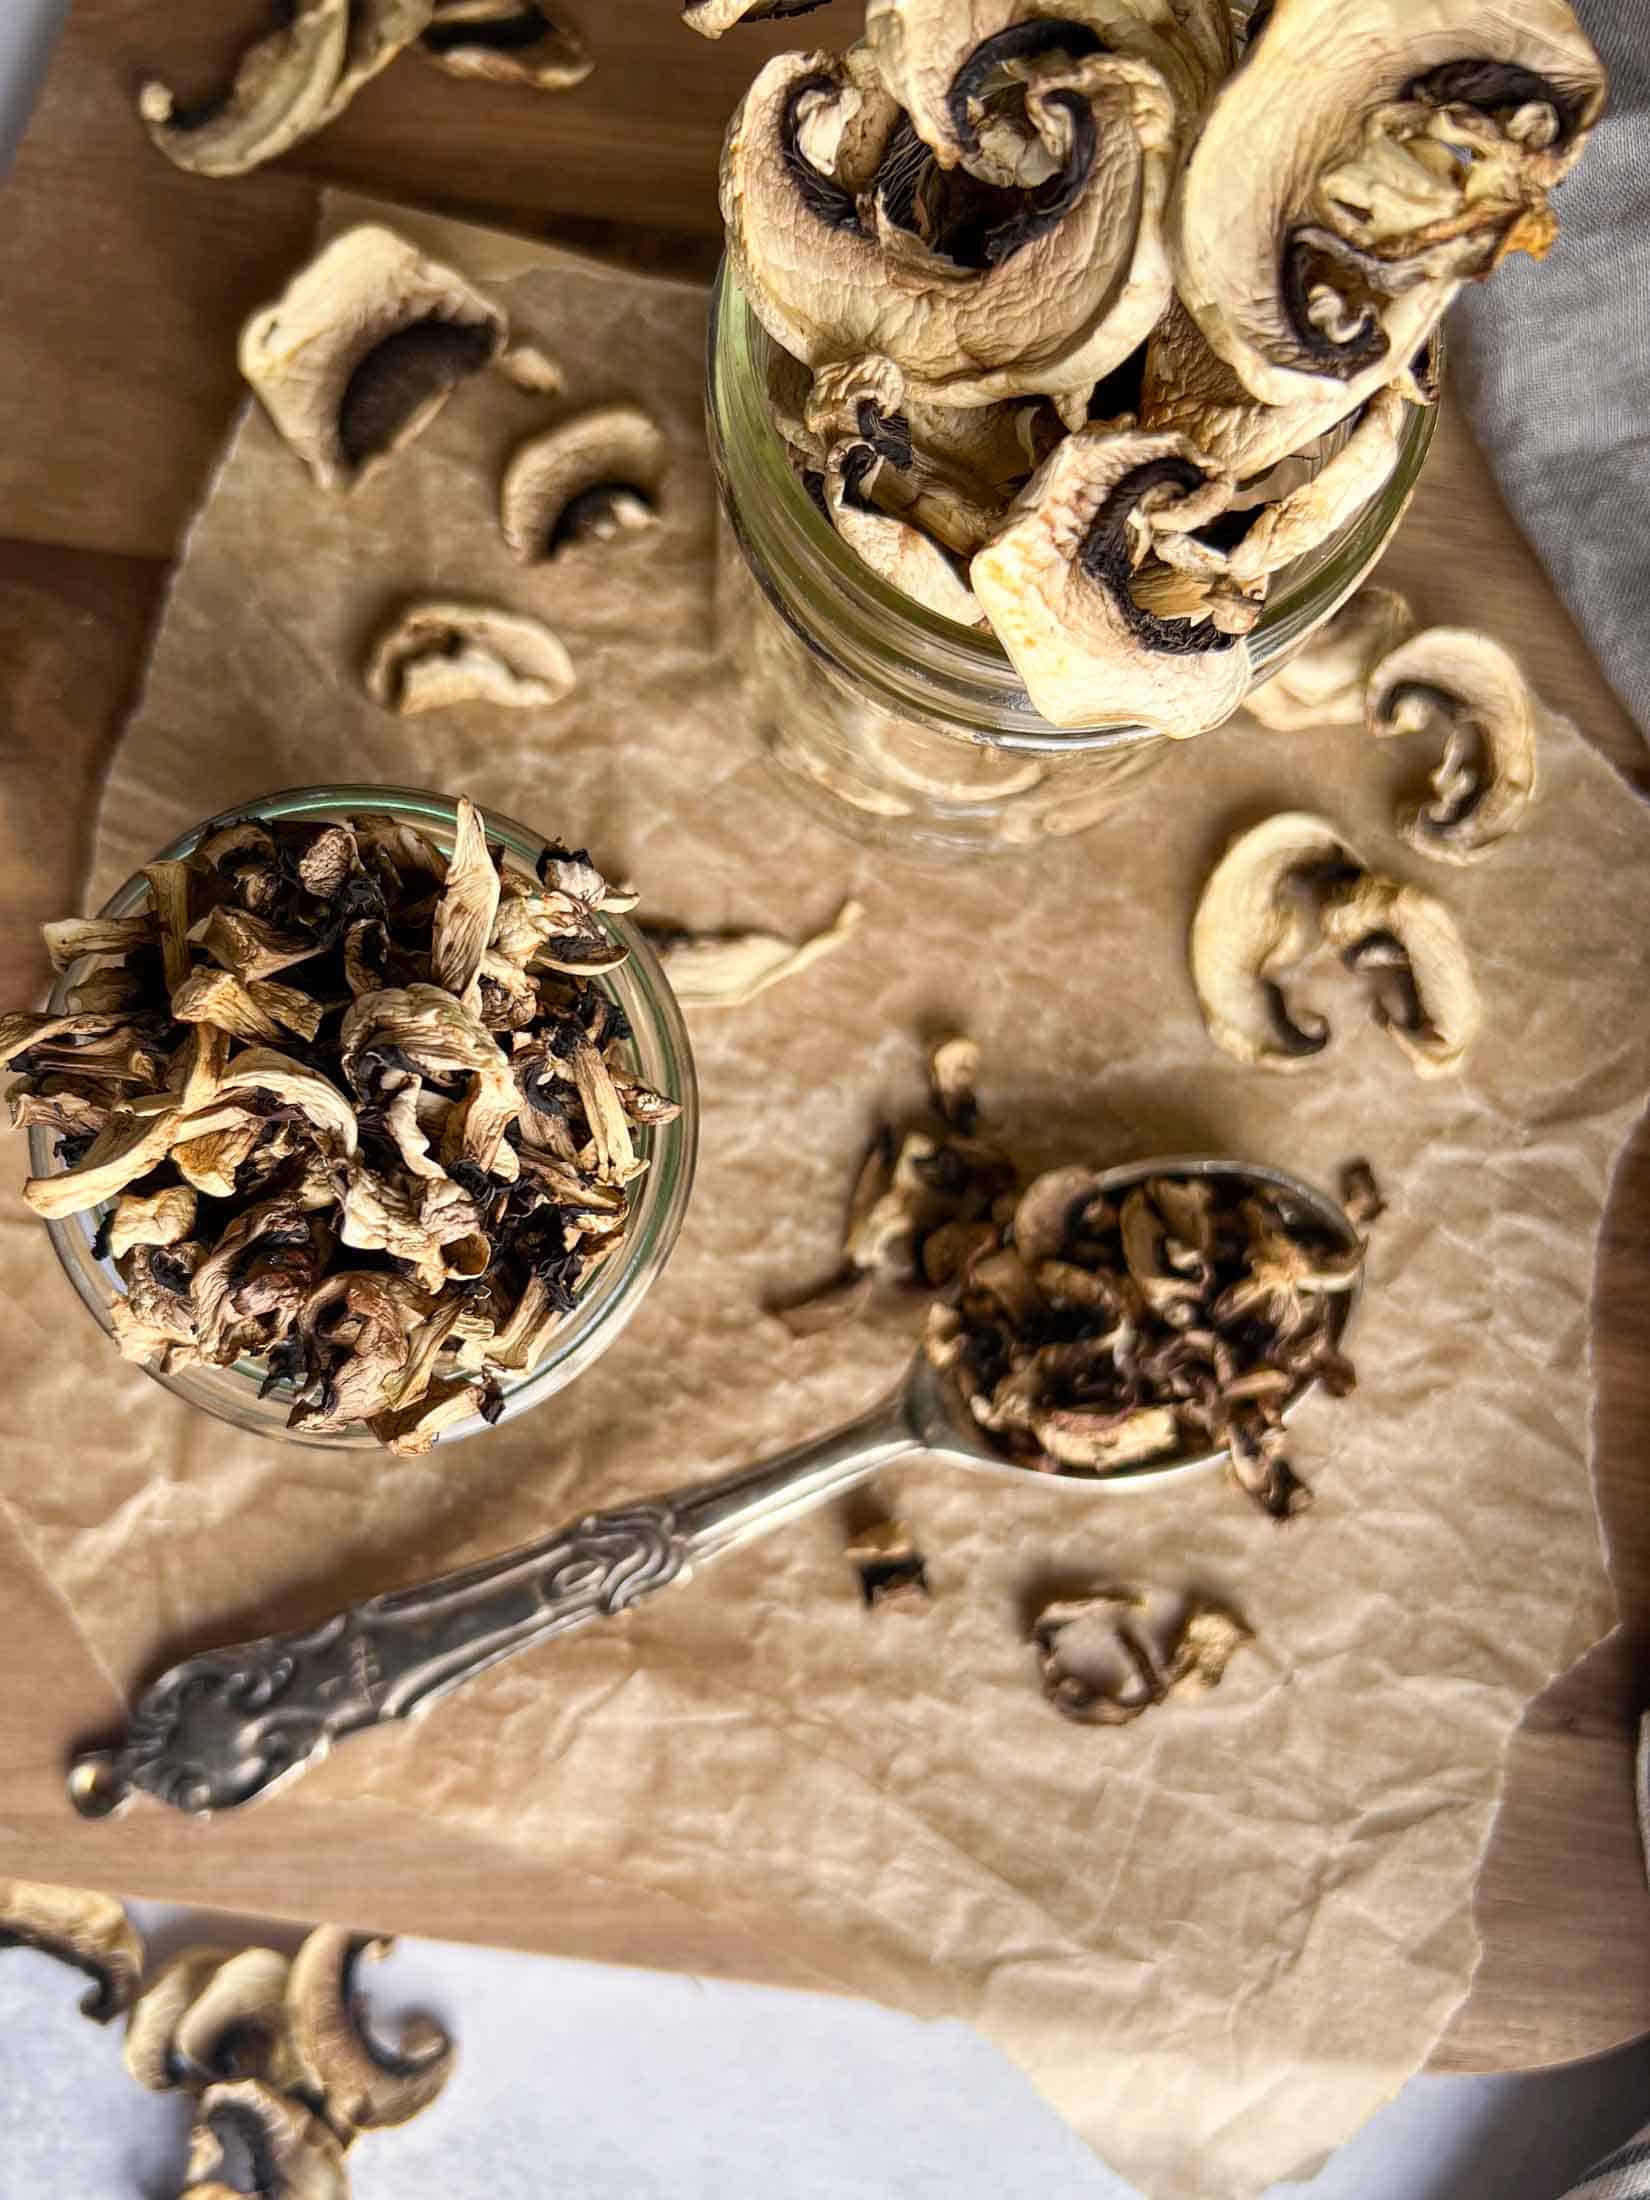 Dried mushrooms spilling out of a glass jar and heaping out of a silver spoon.